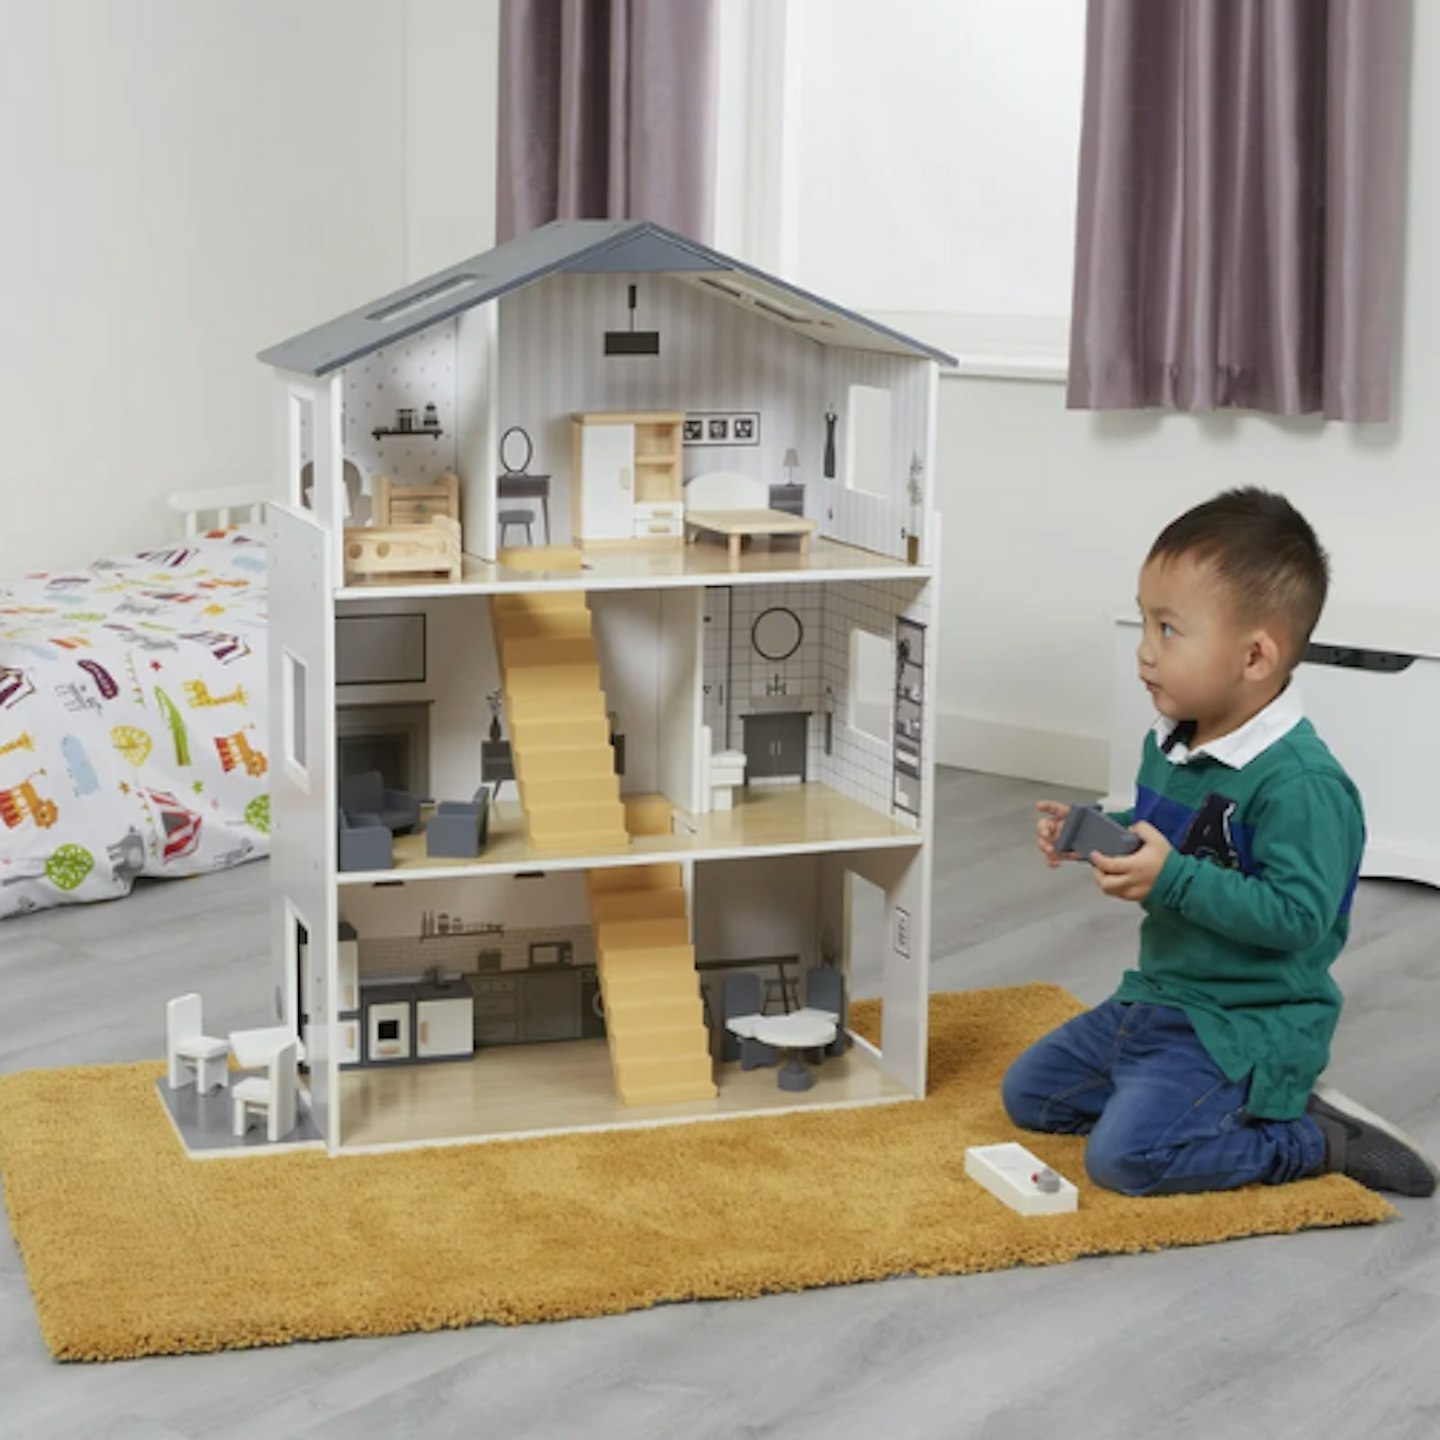 Boyes Kids Dolls House with Handcrafted Wood Furniture Accessories